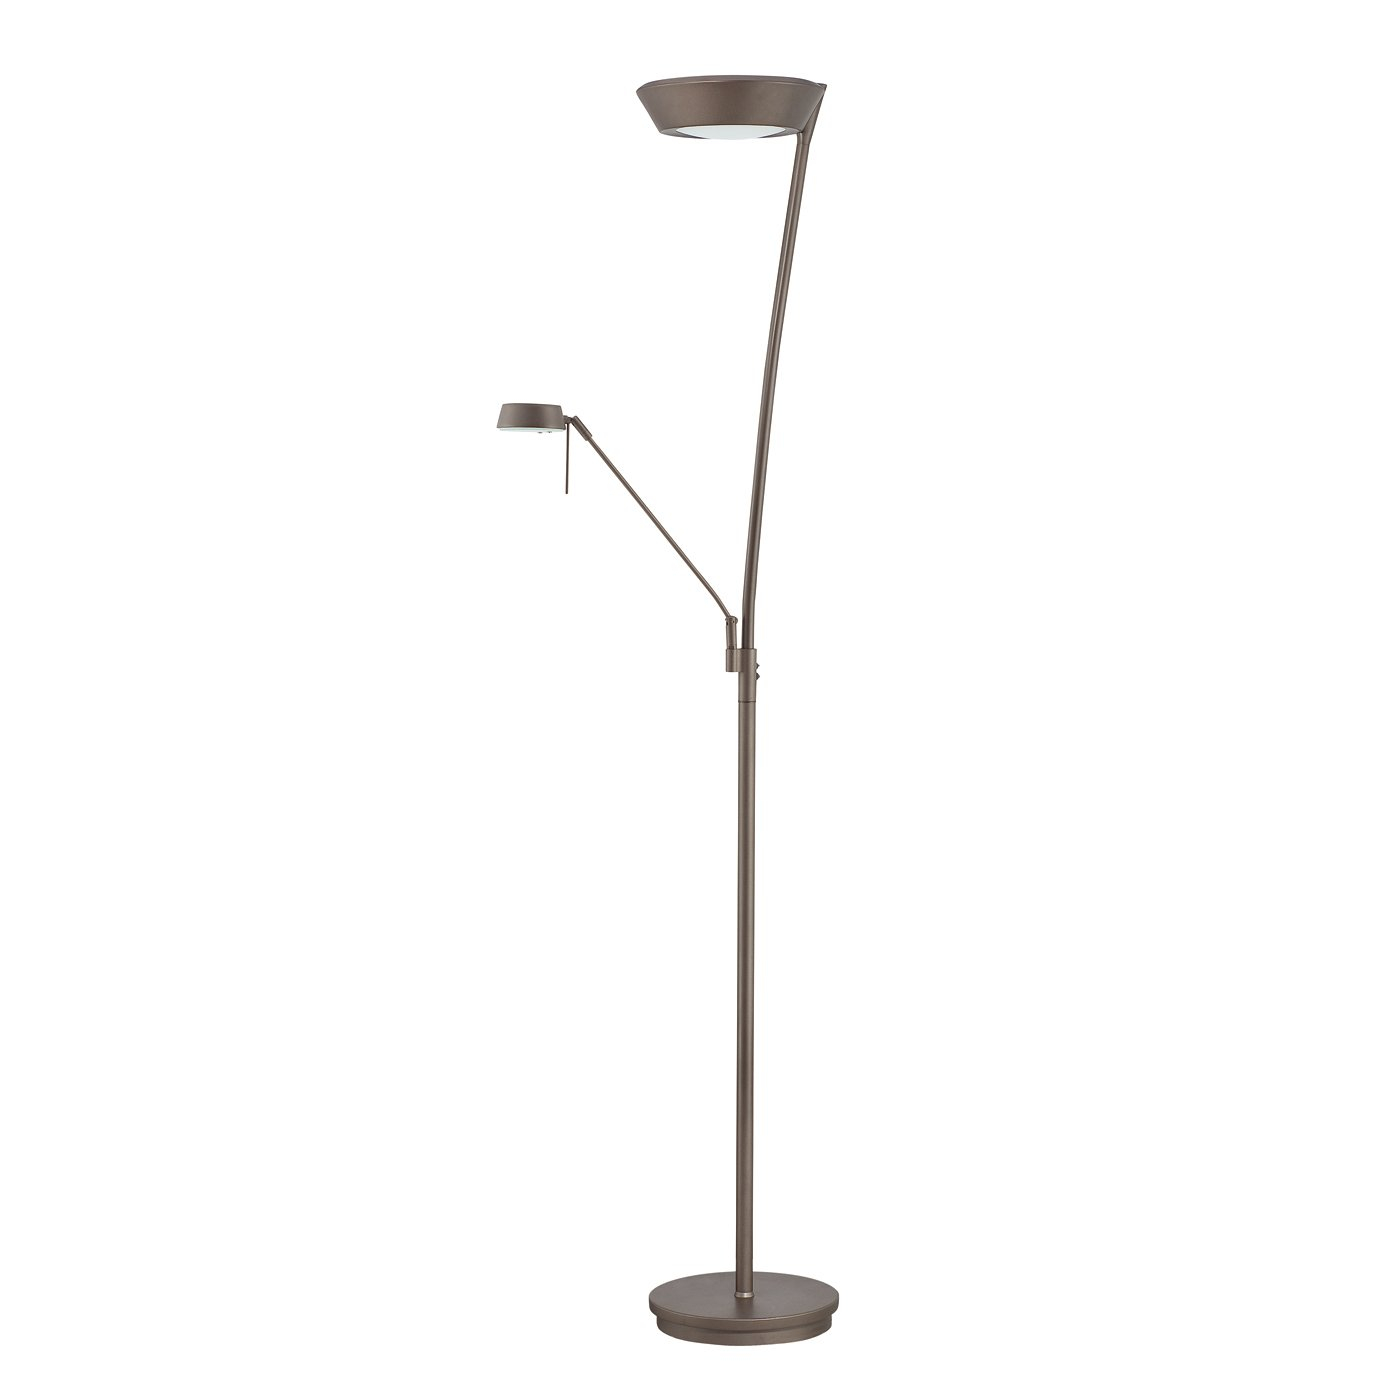 Kendal Lighting Tc4069 Orb 2 Light Torchiere Floor Lamp throughout size 1400 X 1400